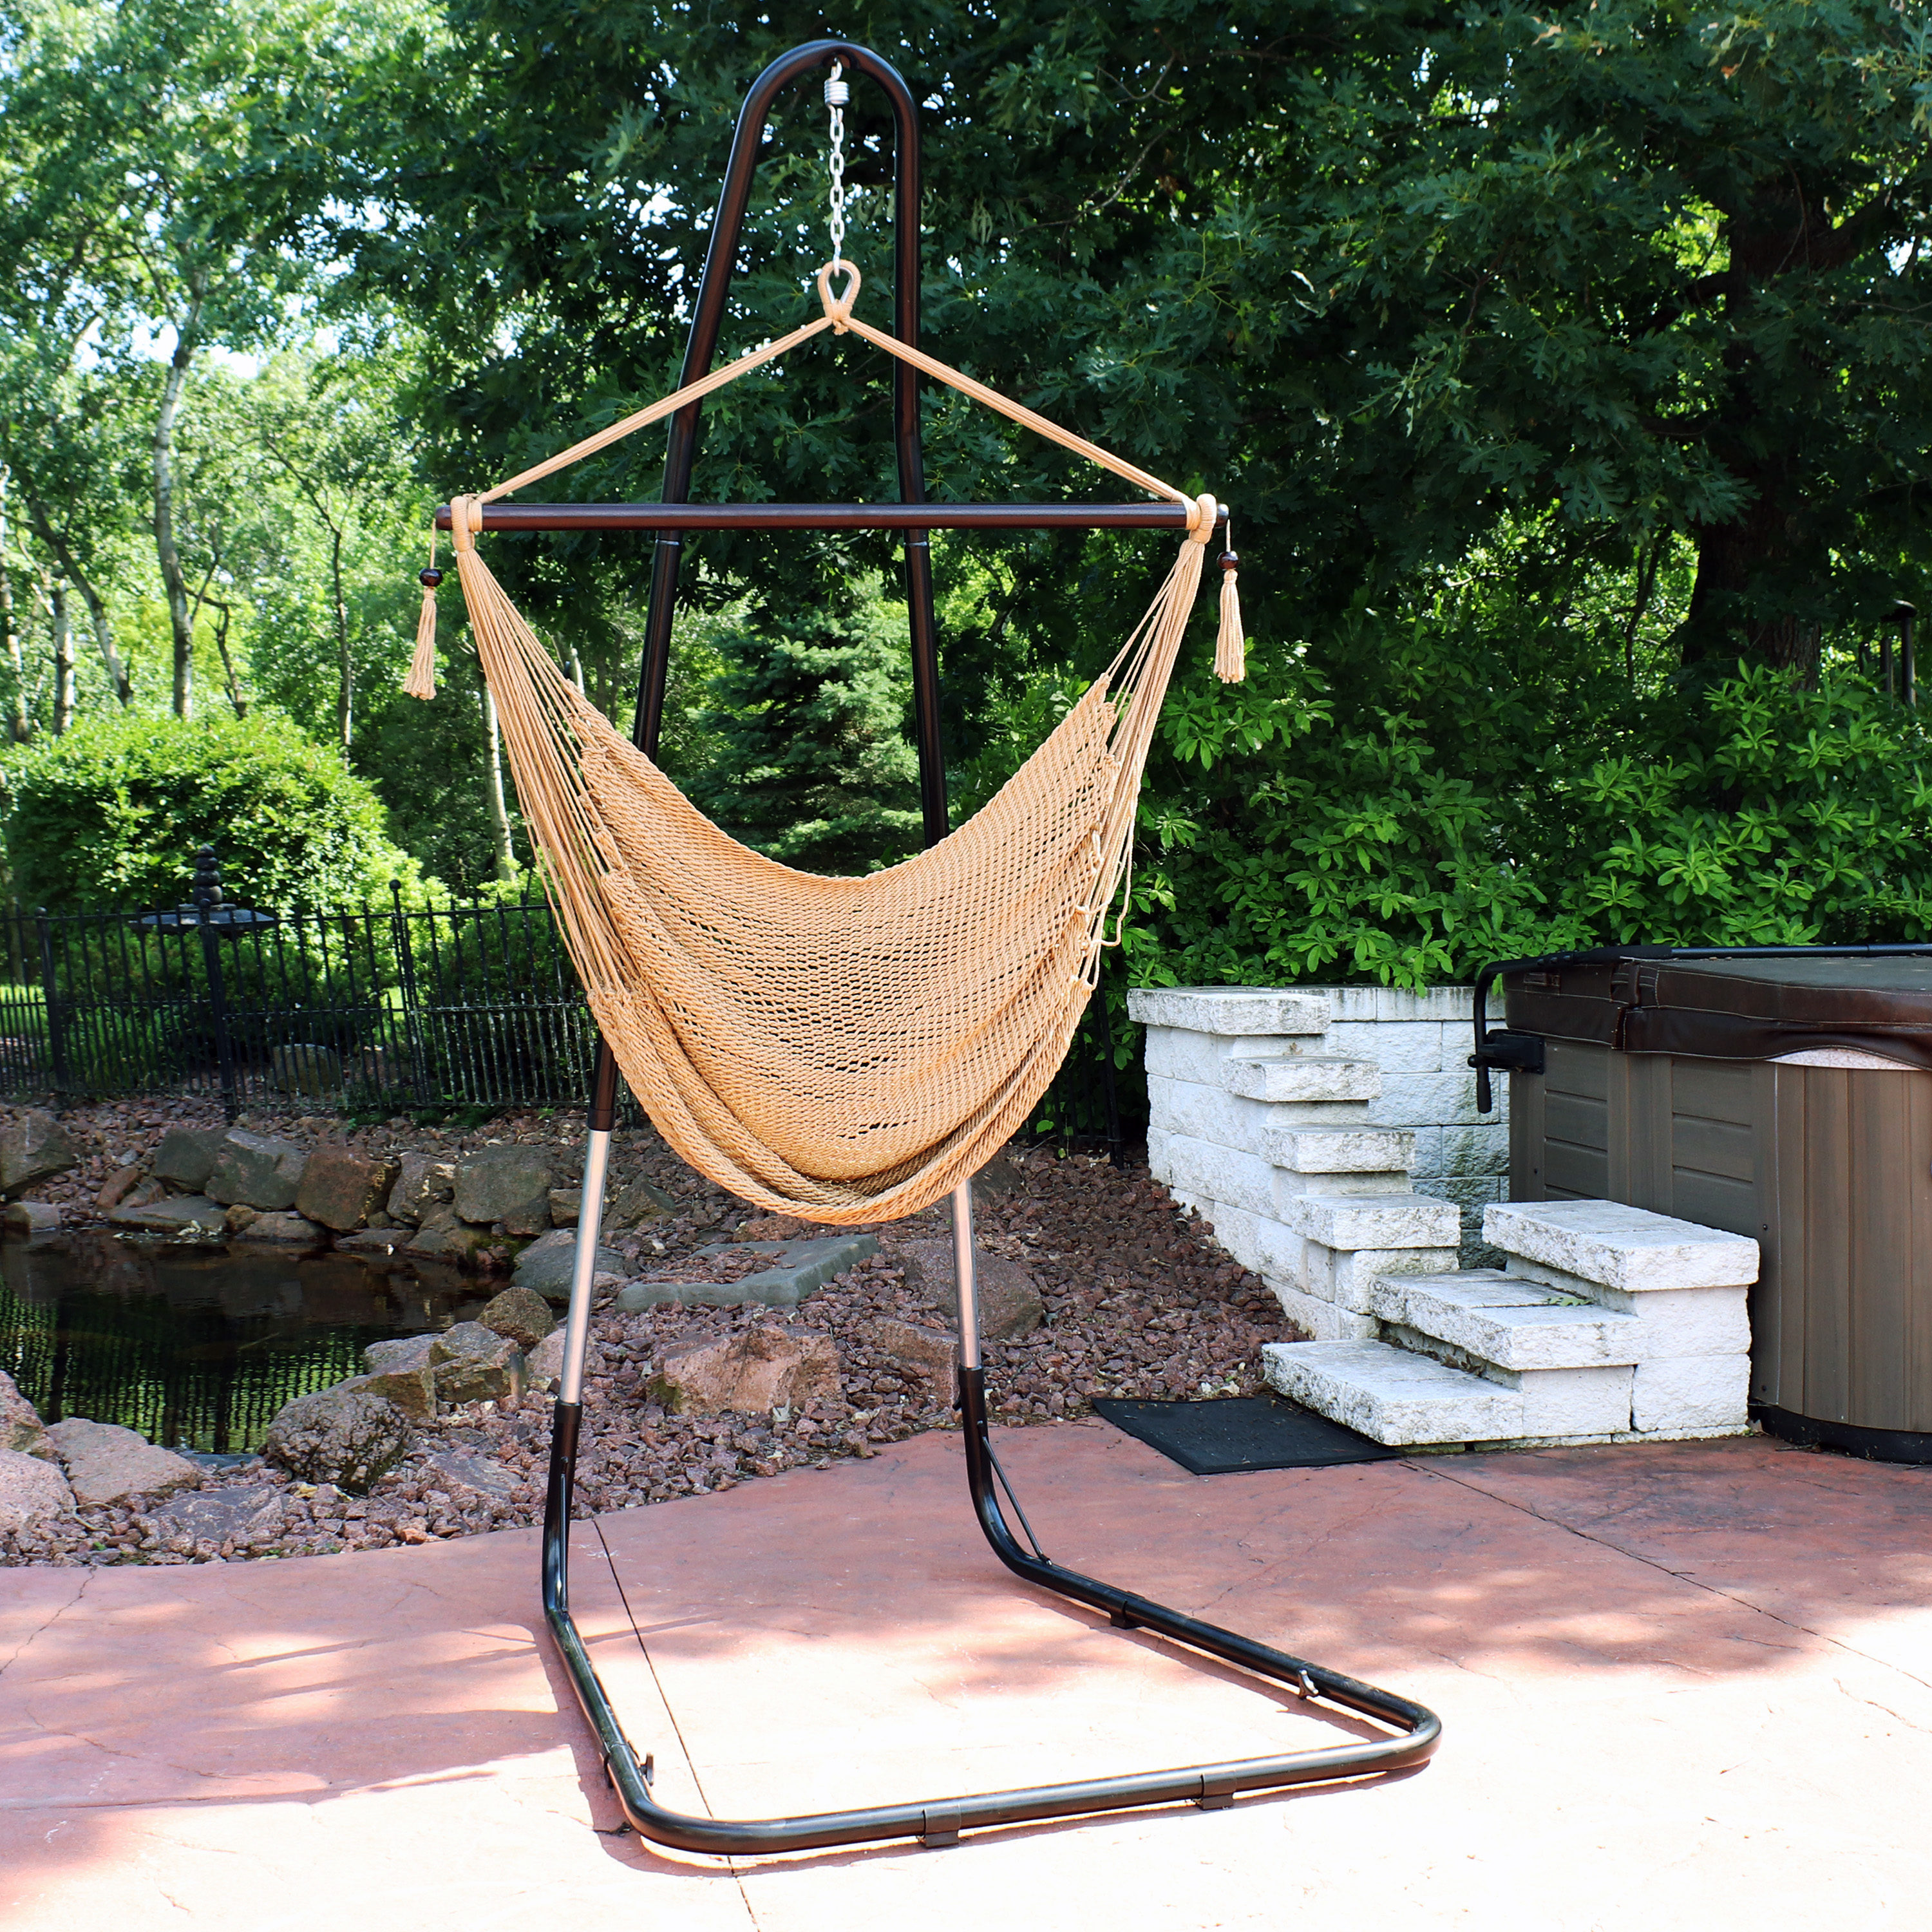 Yard for Indoor or Outdoor Patio Blue Sunnydaze Hanging Rope Hammock Chair Swing with Adjustable Stand and Bedroom Extra Large Caribbean Porch 